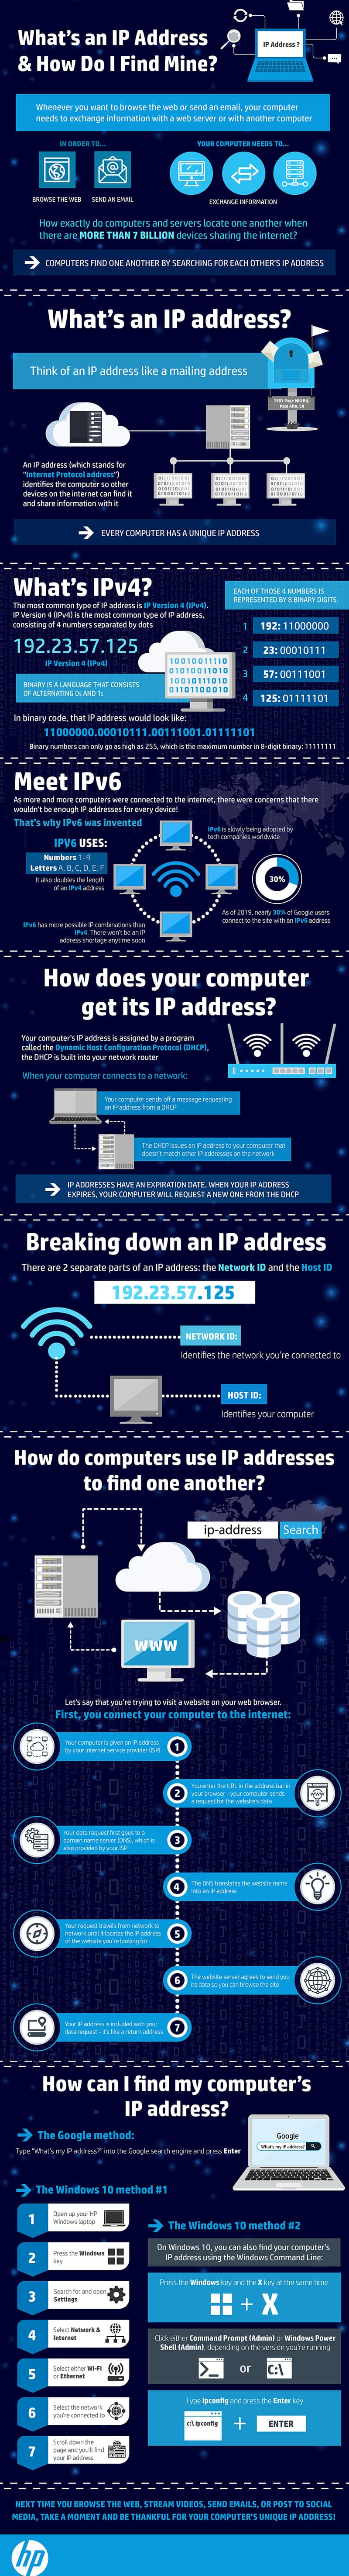 What’s an IP Address and How Do I Find Mine?